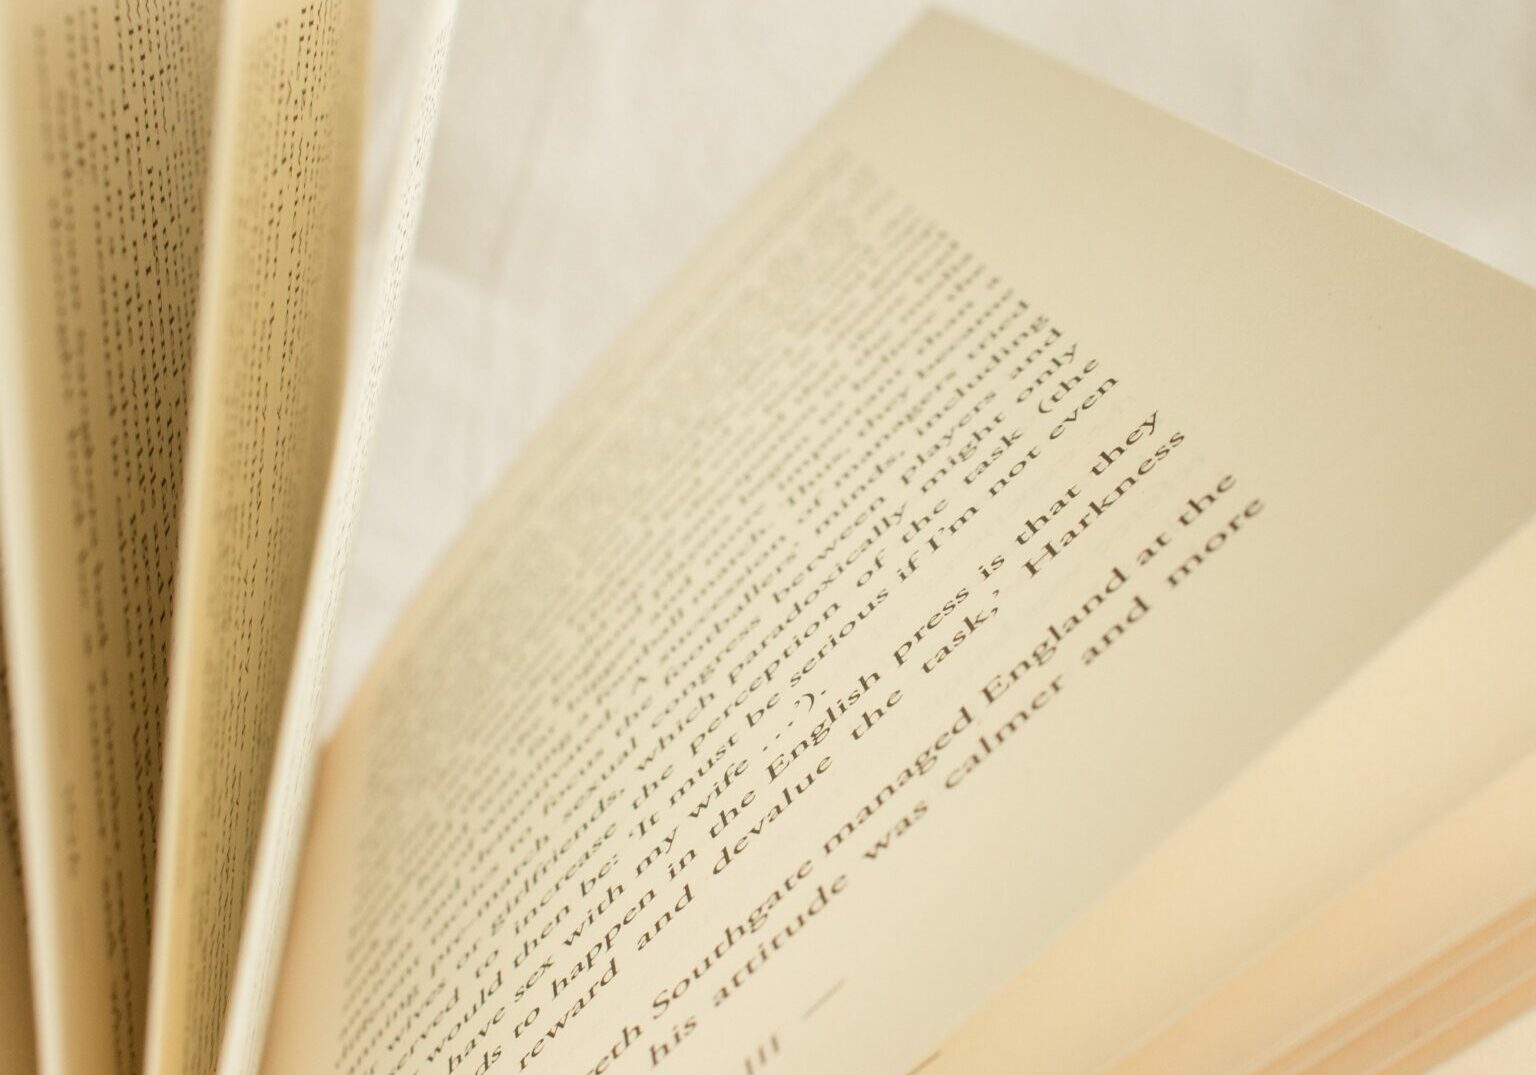 Light shining on the open pages of a book